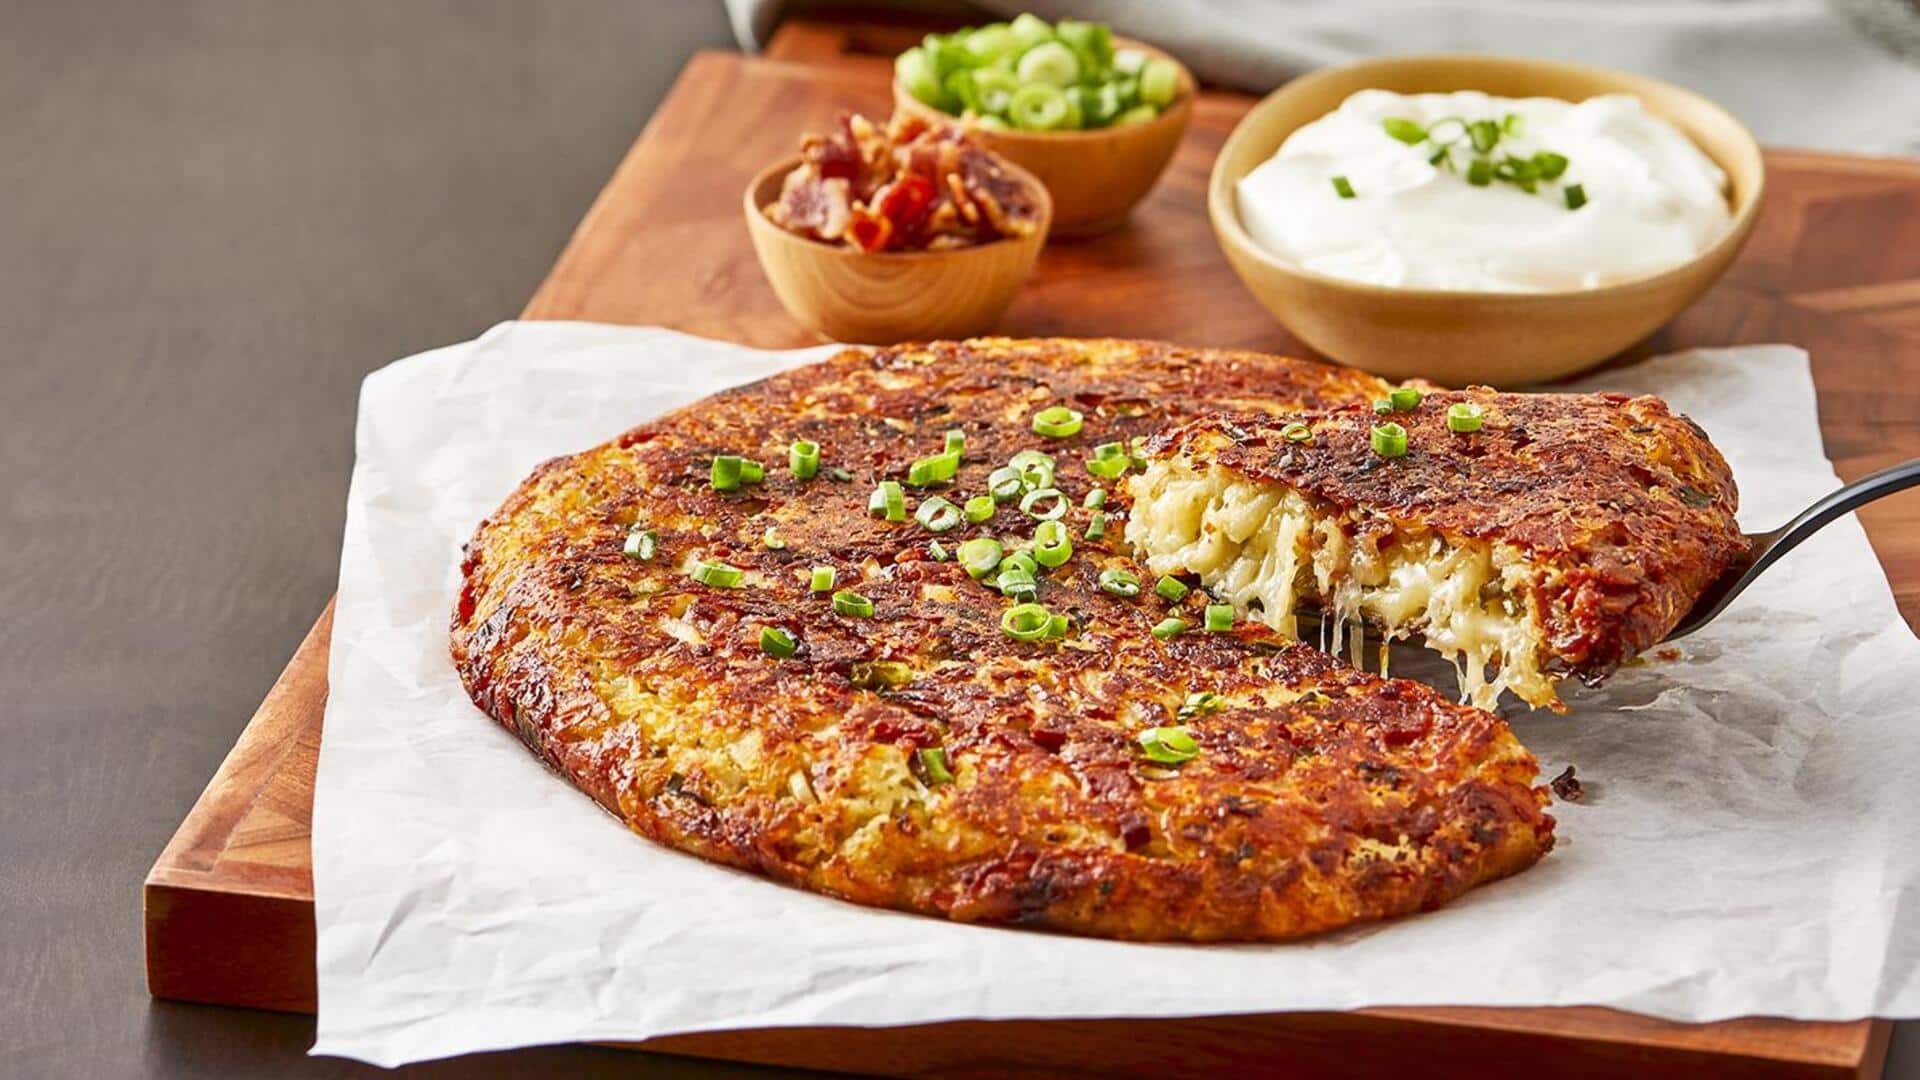 Recipe: Impress your guests with this delicious Swiss rosti